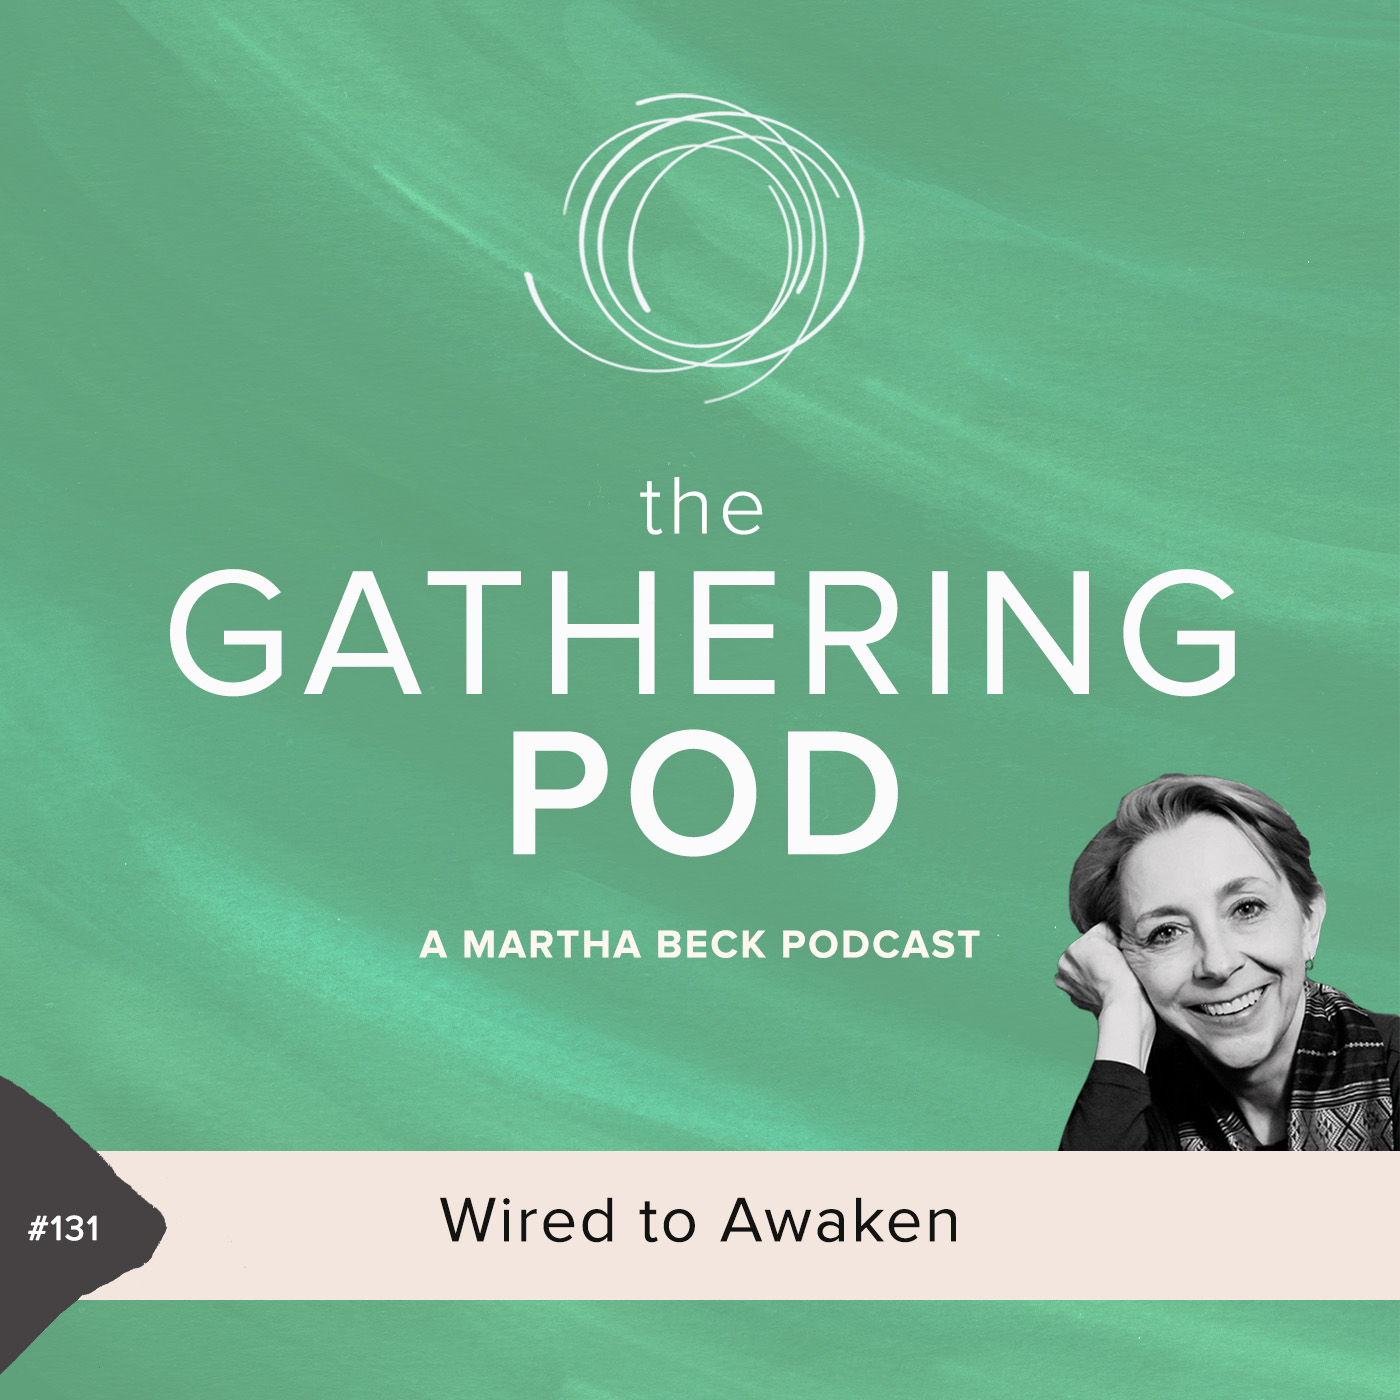 Image for The Gathering Pod A Martha Beck Podcast Episode #131 Wired to Awaken